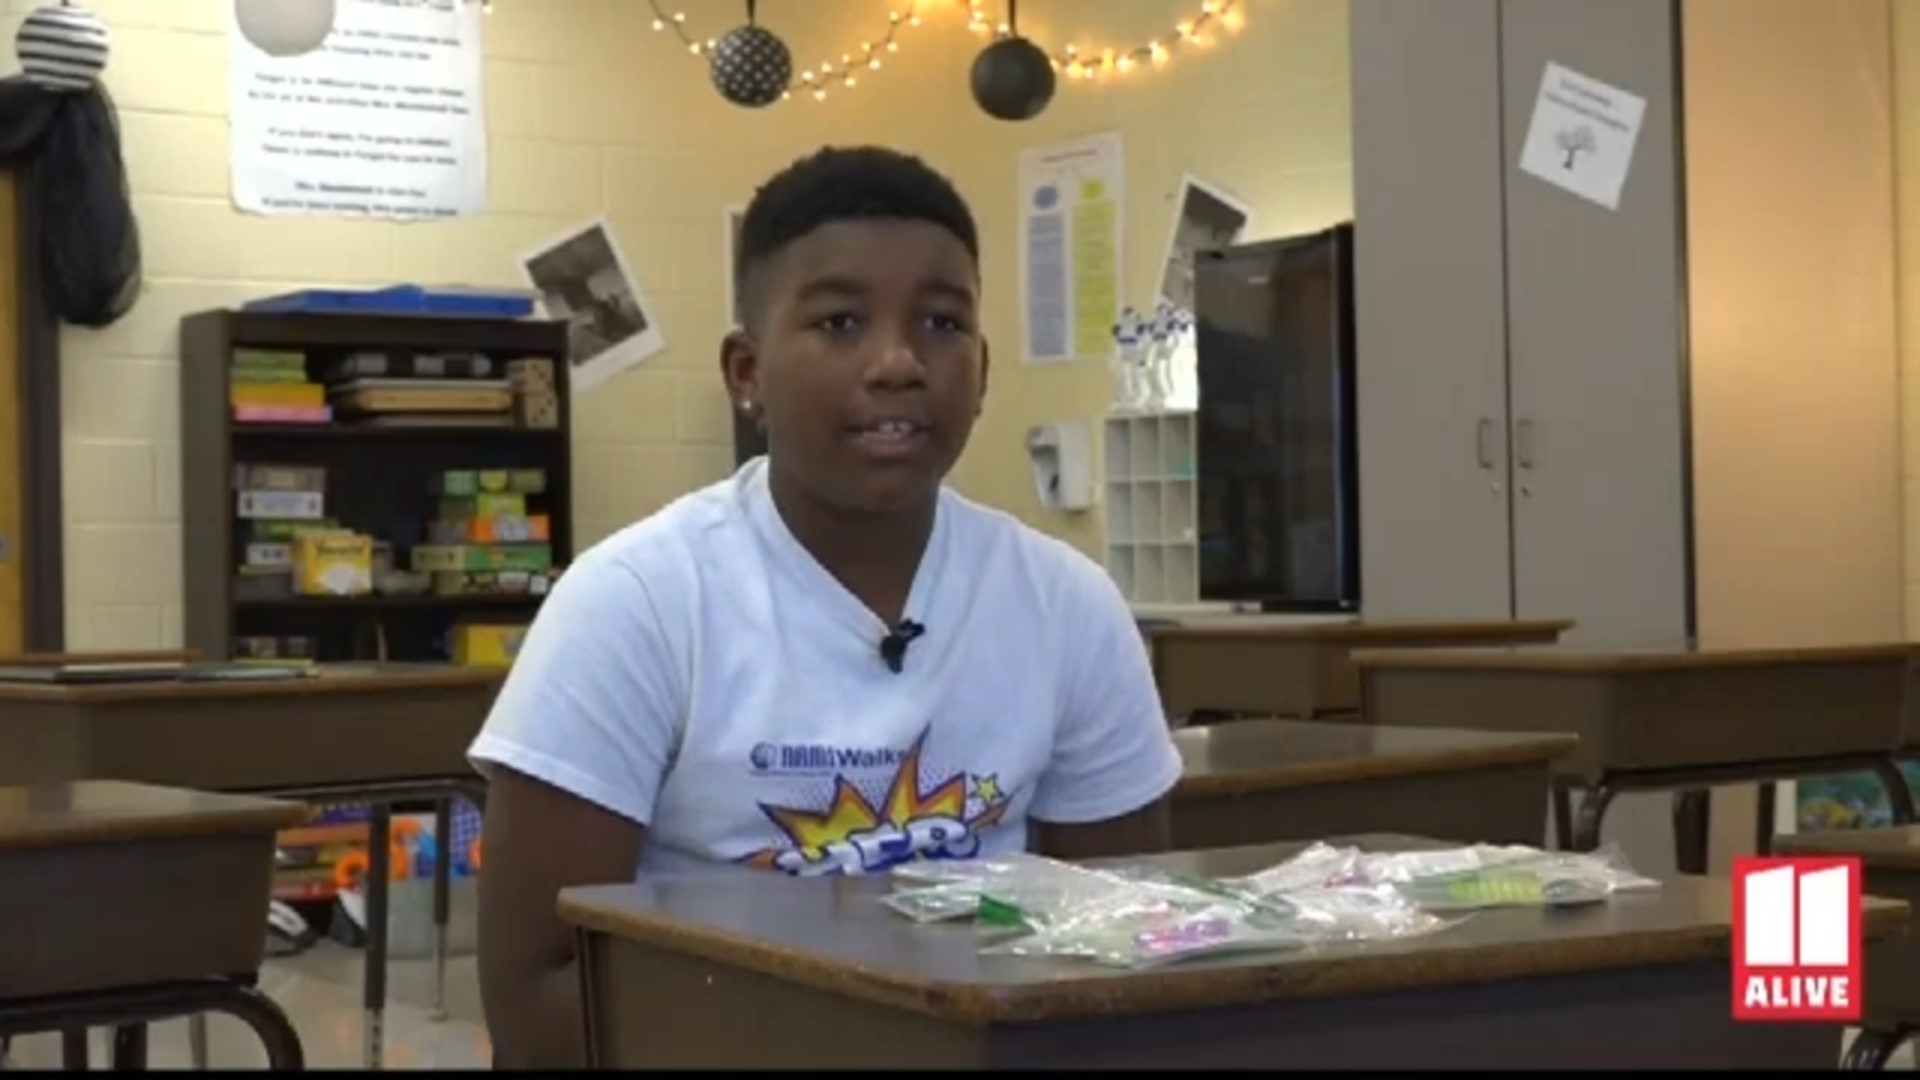 This 10-year-old just won a prestigious leadership award for students.